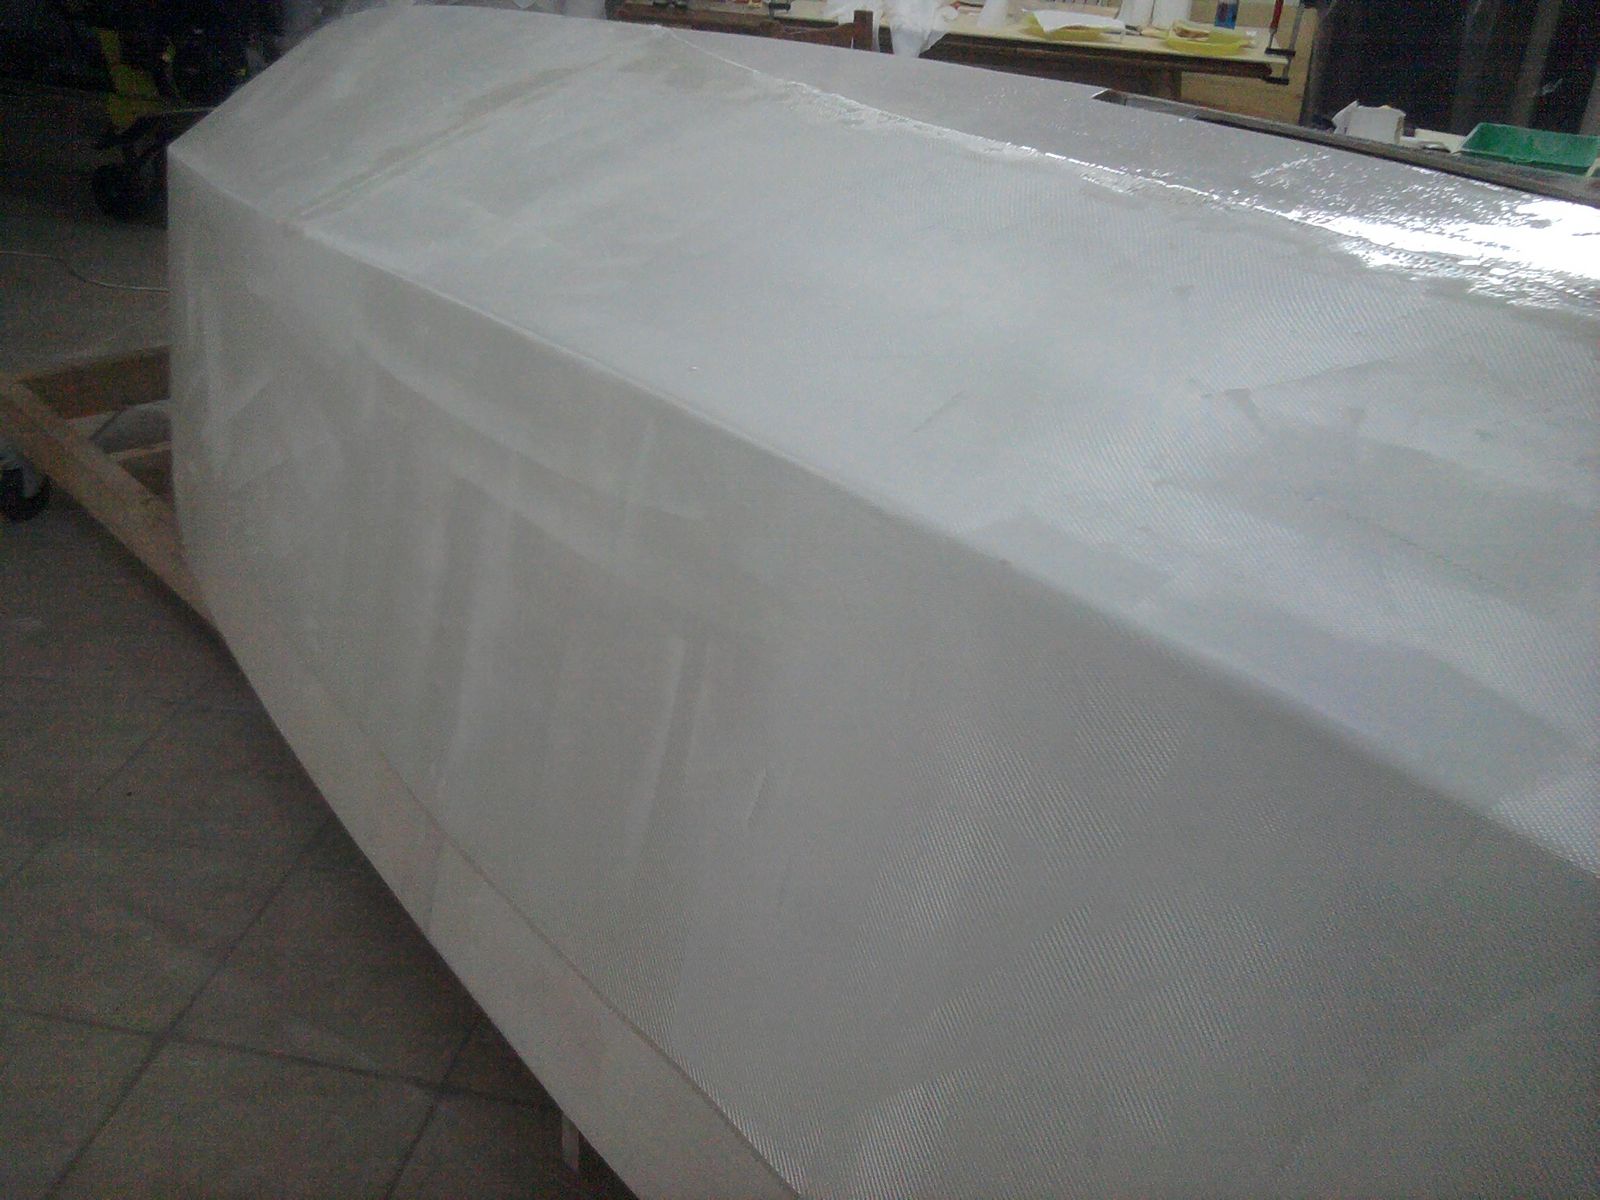 Laying out the fiberglass sheet. You can’t really see it because of the white pigmented epoxy coat
